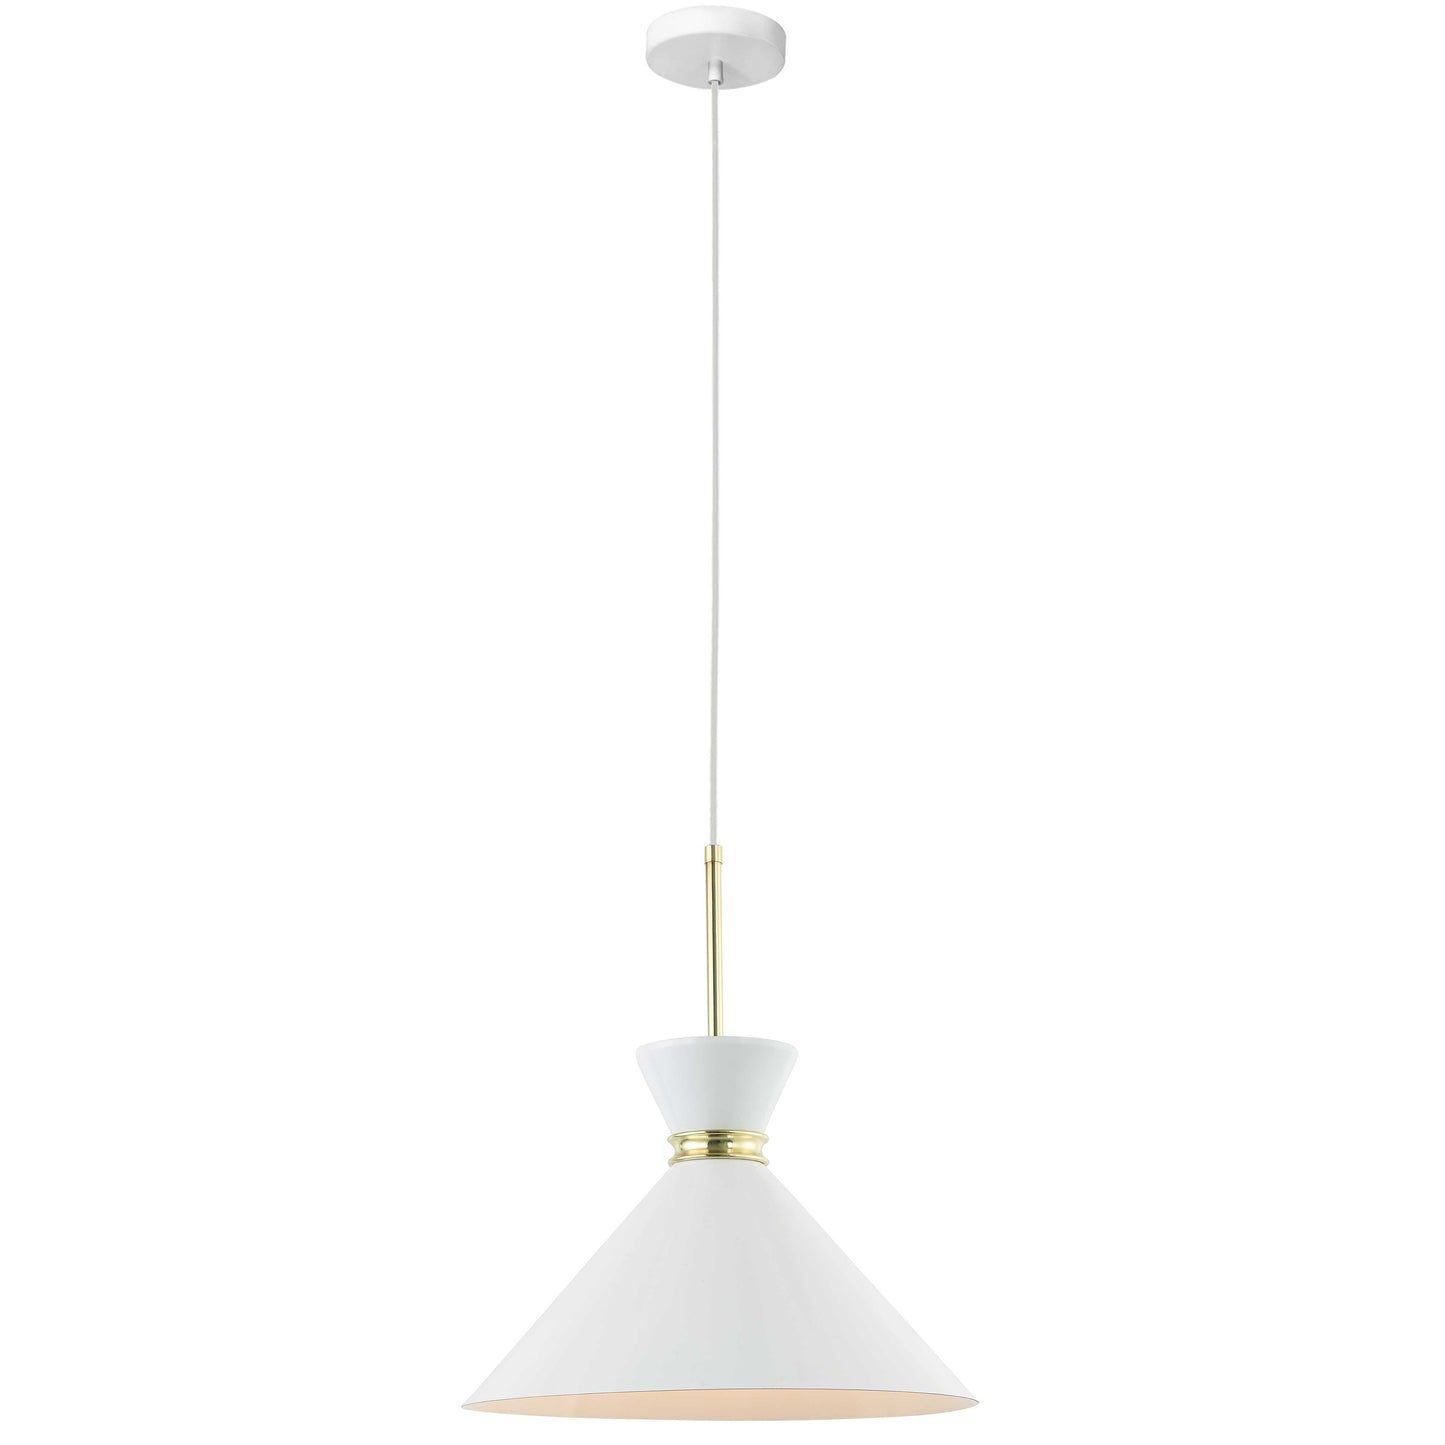 Dainolite 1 Light Incandescent Pendant, Gloss White Shade with Aged Brass Accent